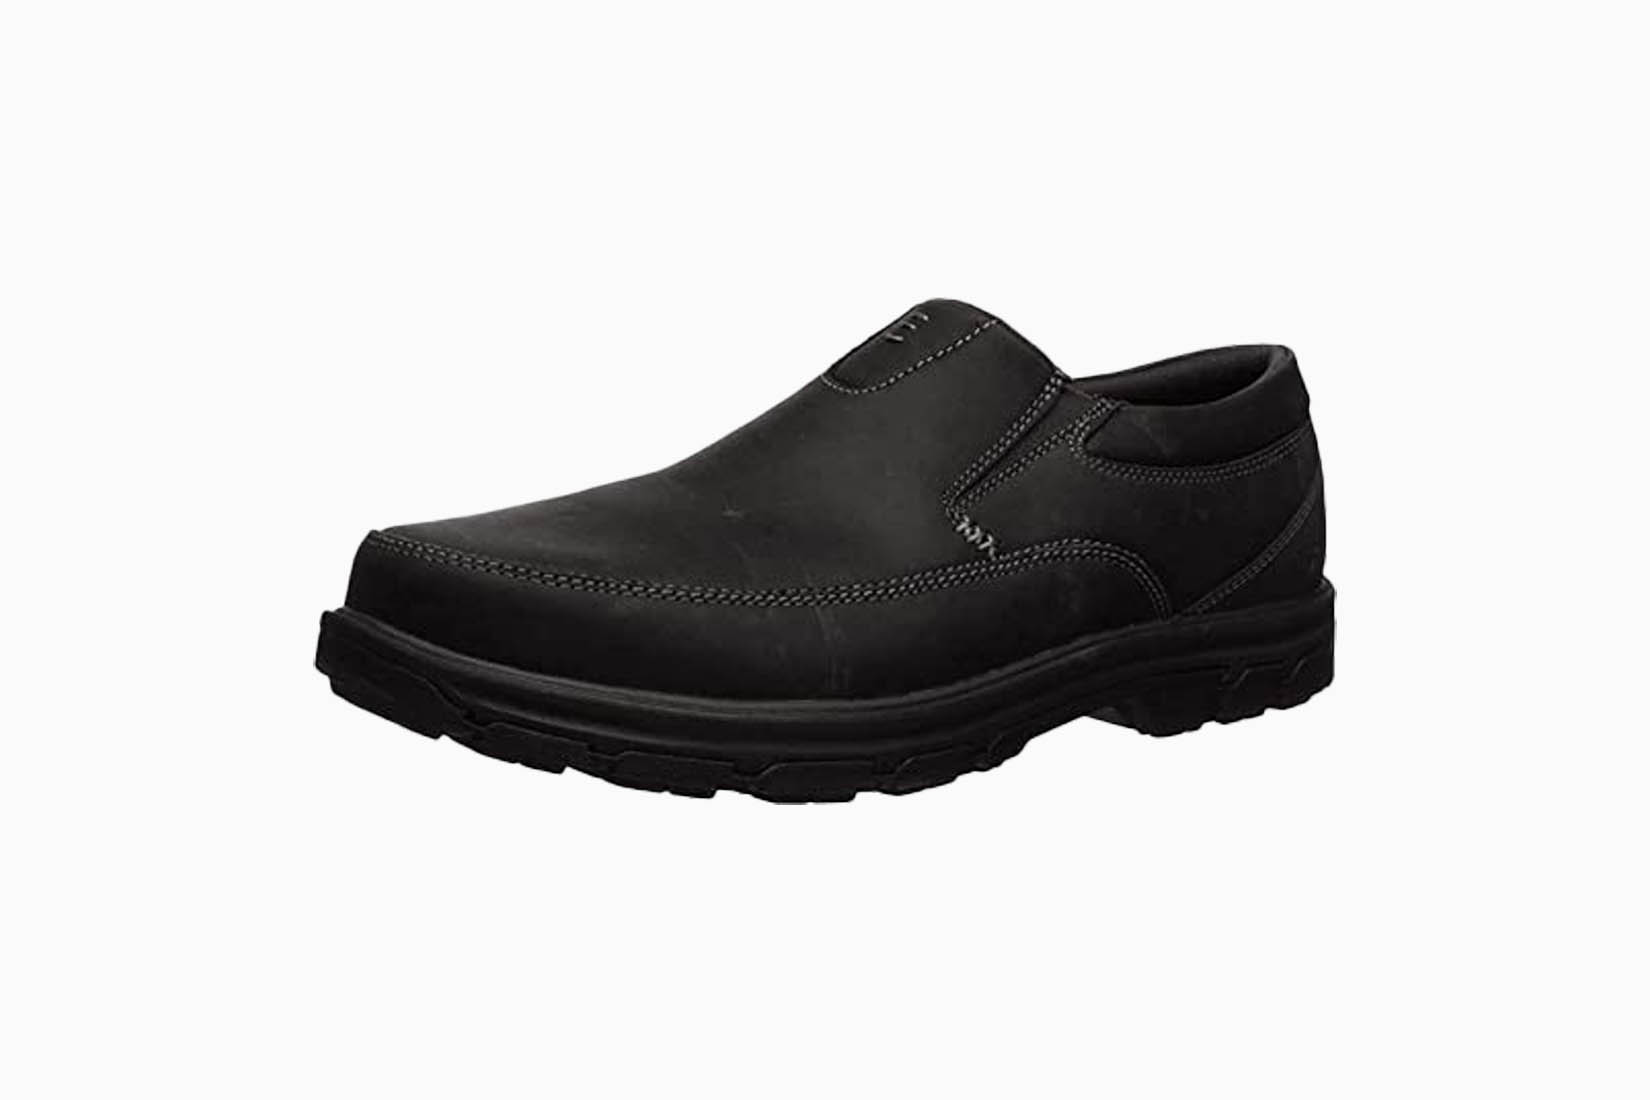 Best Men’s Professional Shoes For Standing All Day in (2022) Skechers Loafer